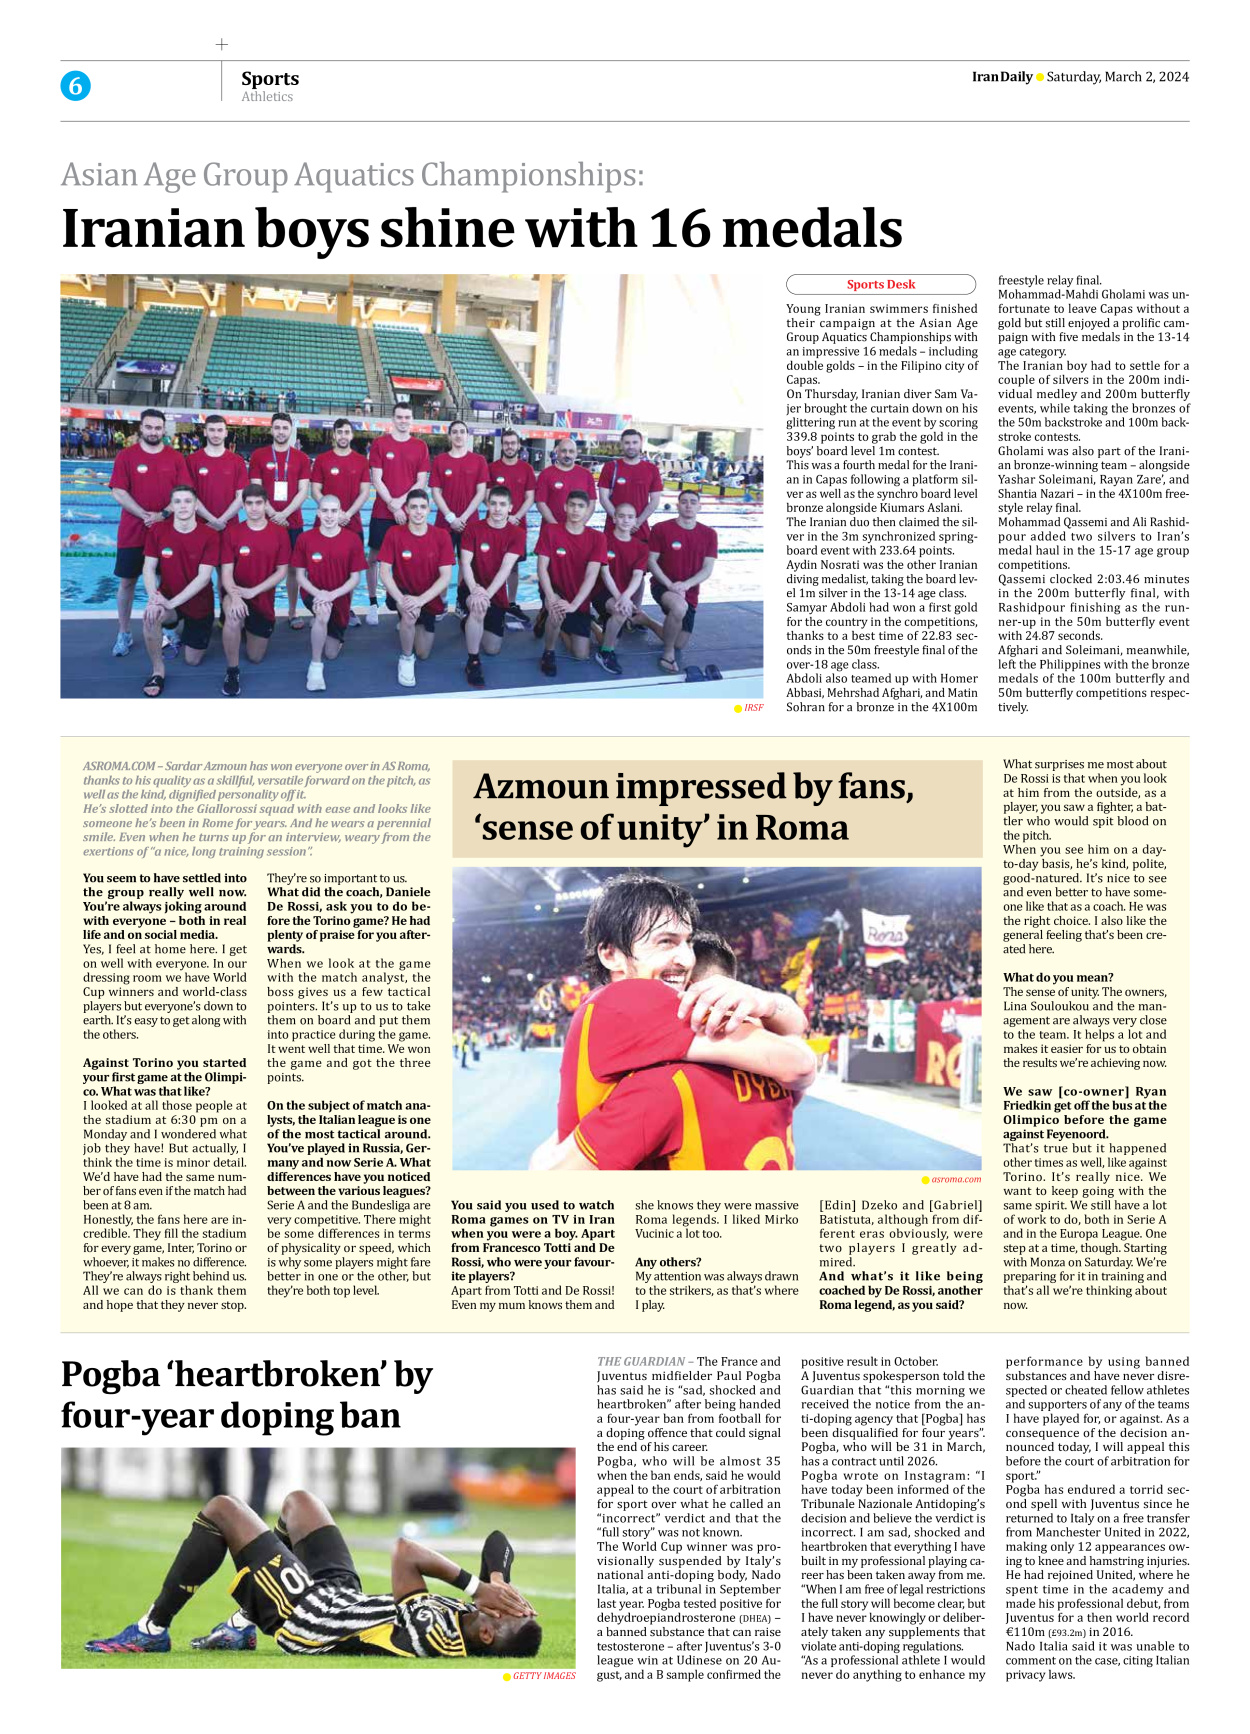 Iran Daily - Number Seven Thousand Five Hundred and Nineteen - 02 March 2024 - Page 6